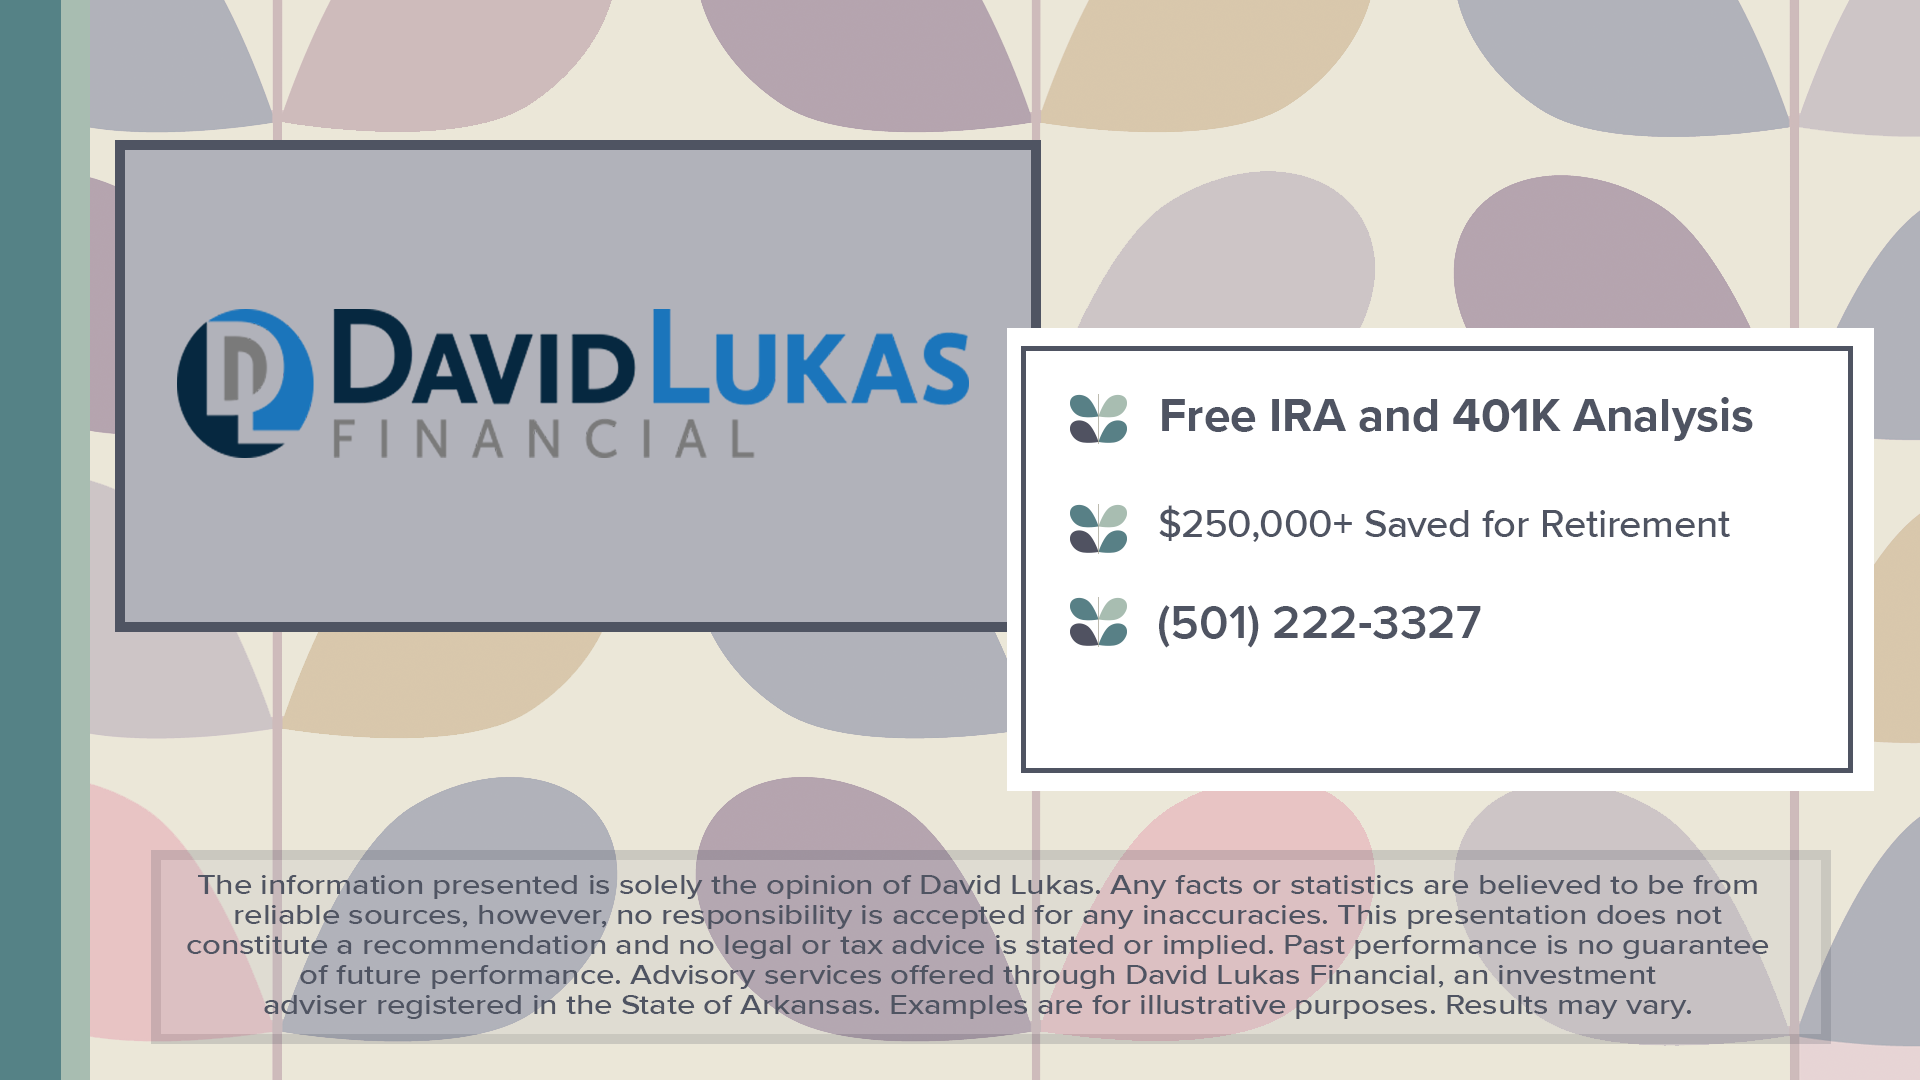 David Lukas tells us three things you need to do with your IRA, 401K, pension or other tax-deferred account to save thousands in taxes.